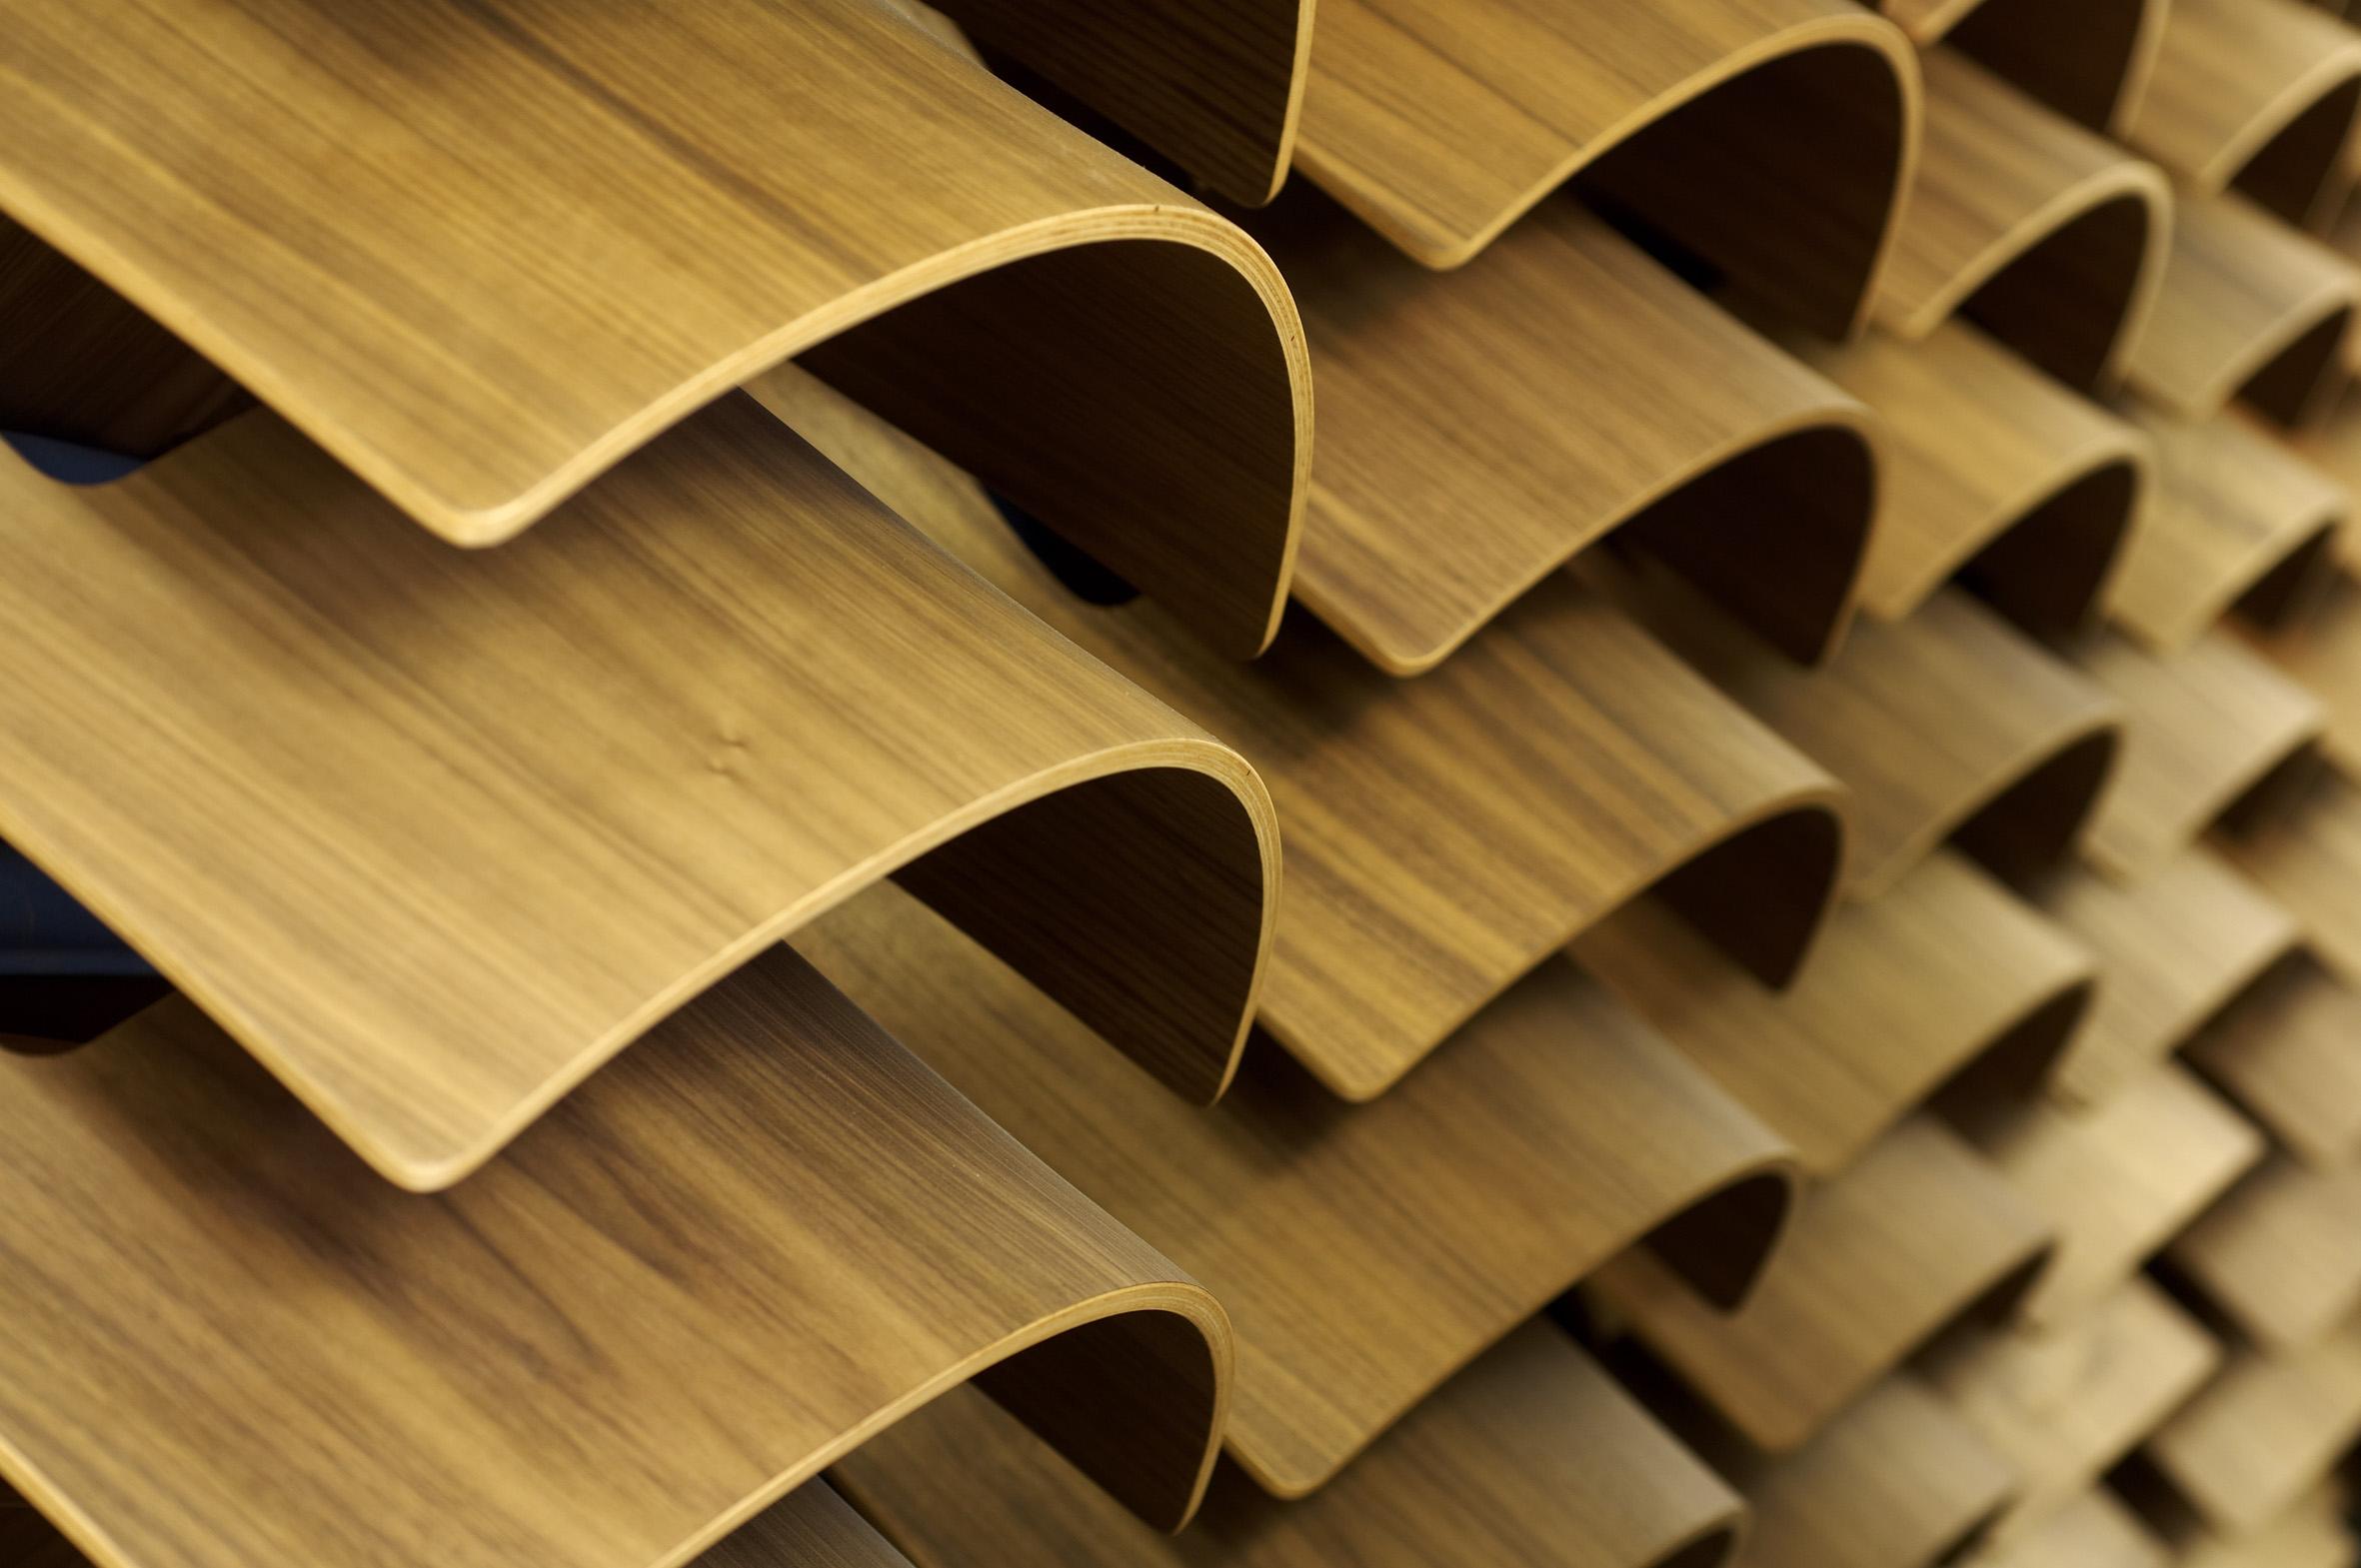 This picture shows undulated wooden panels